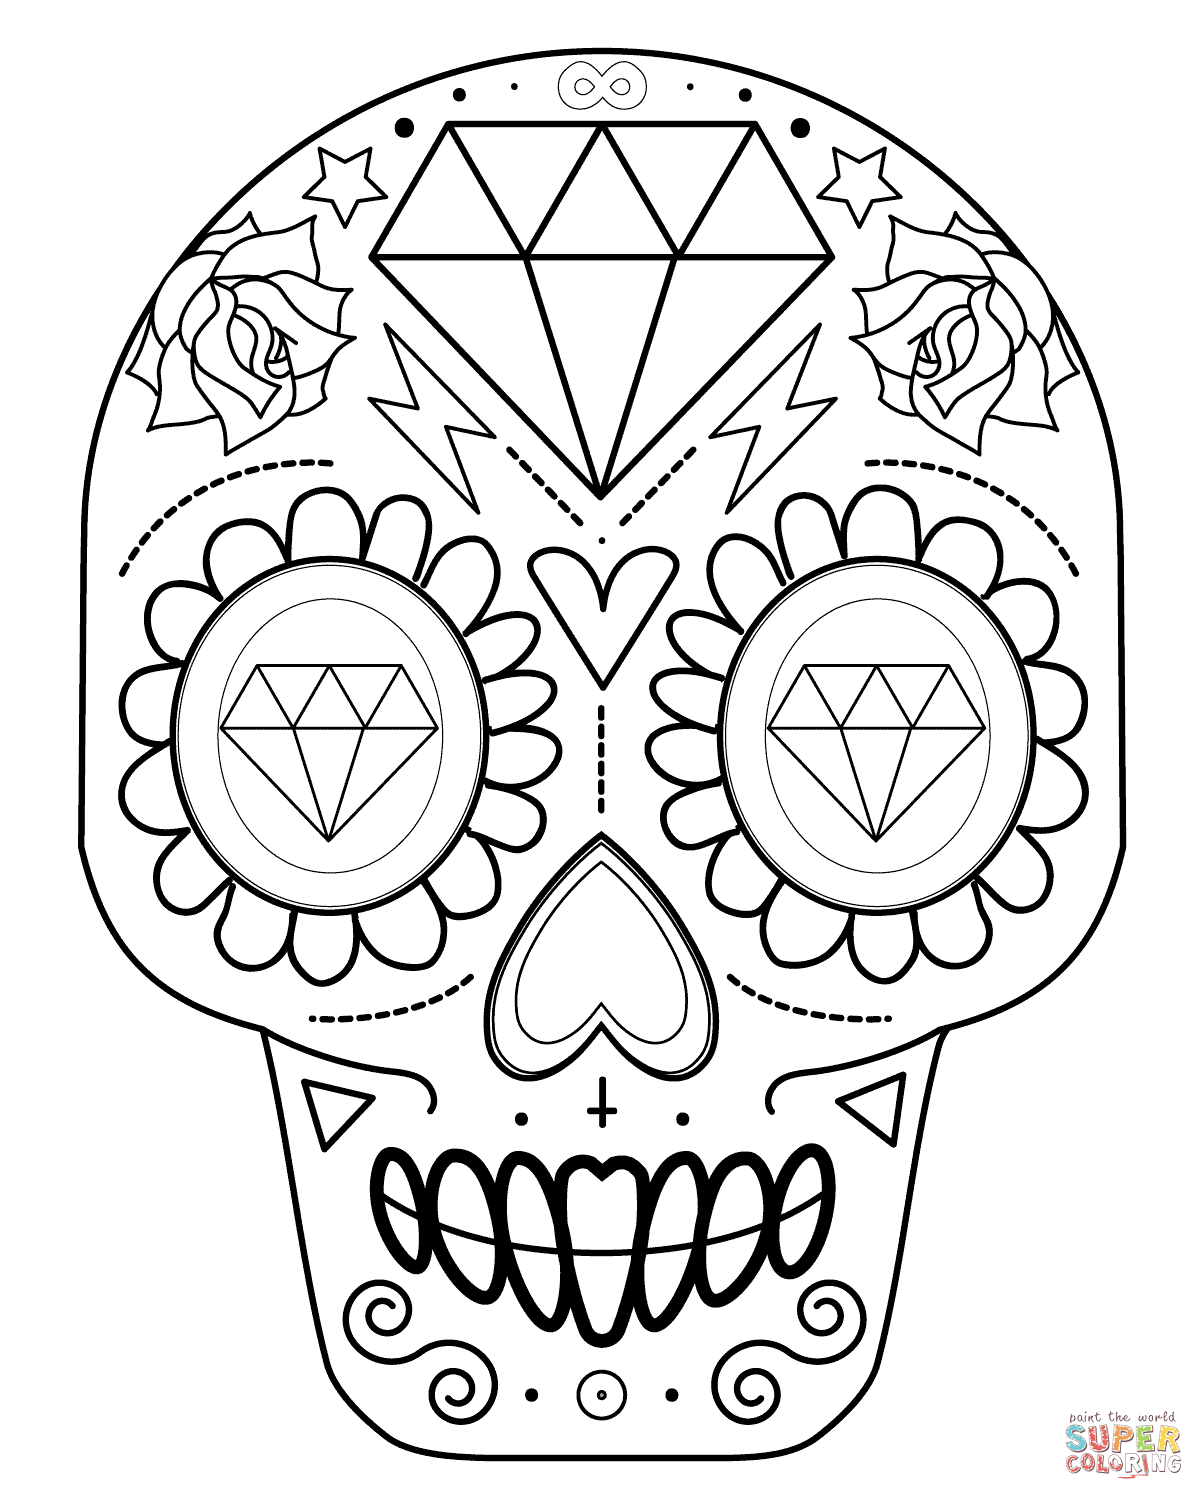 Sugar Skull with Diamonds coloring page | Free Printable Coloring ...